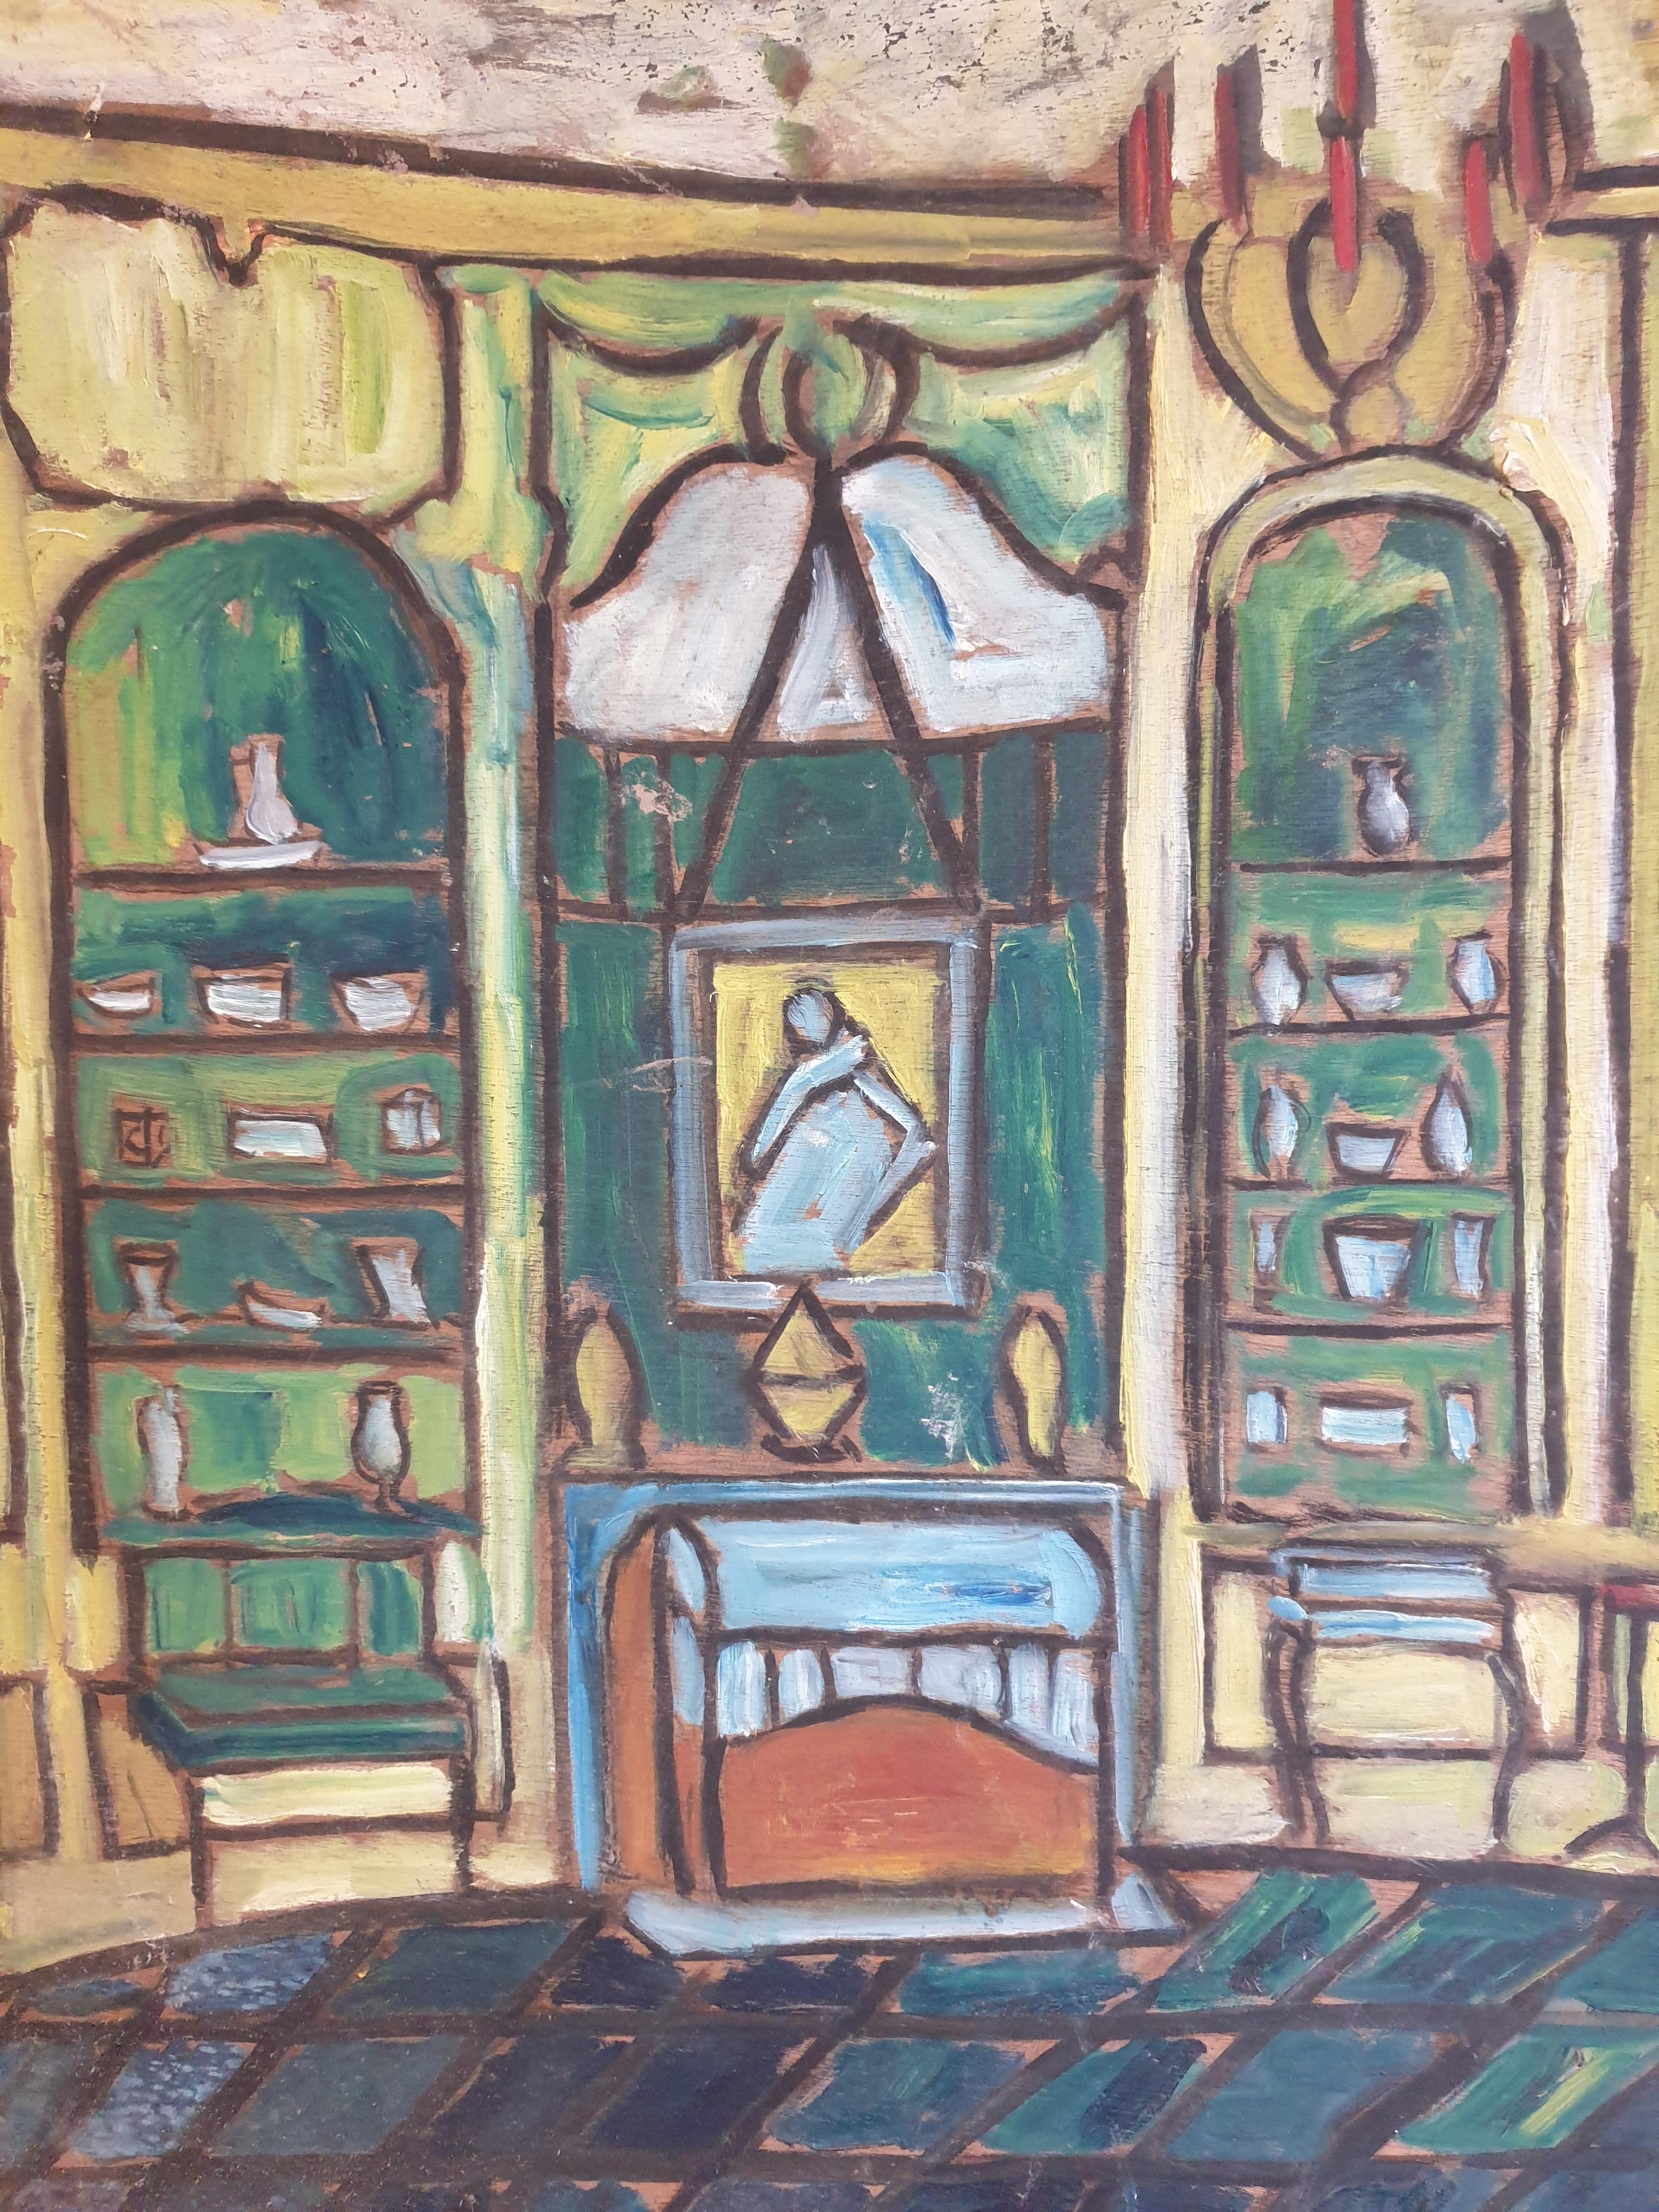 The Salon. Naiive Colourful French Chateau Interior, Oil on Board. - Painting by Unknown